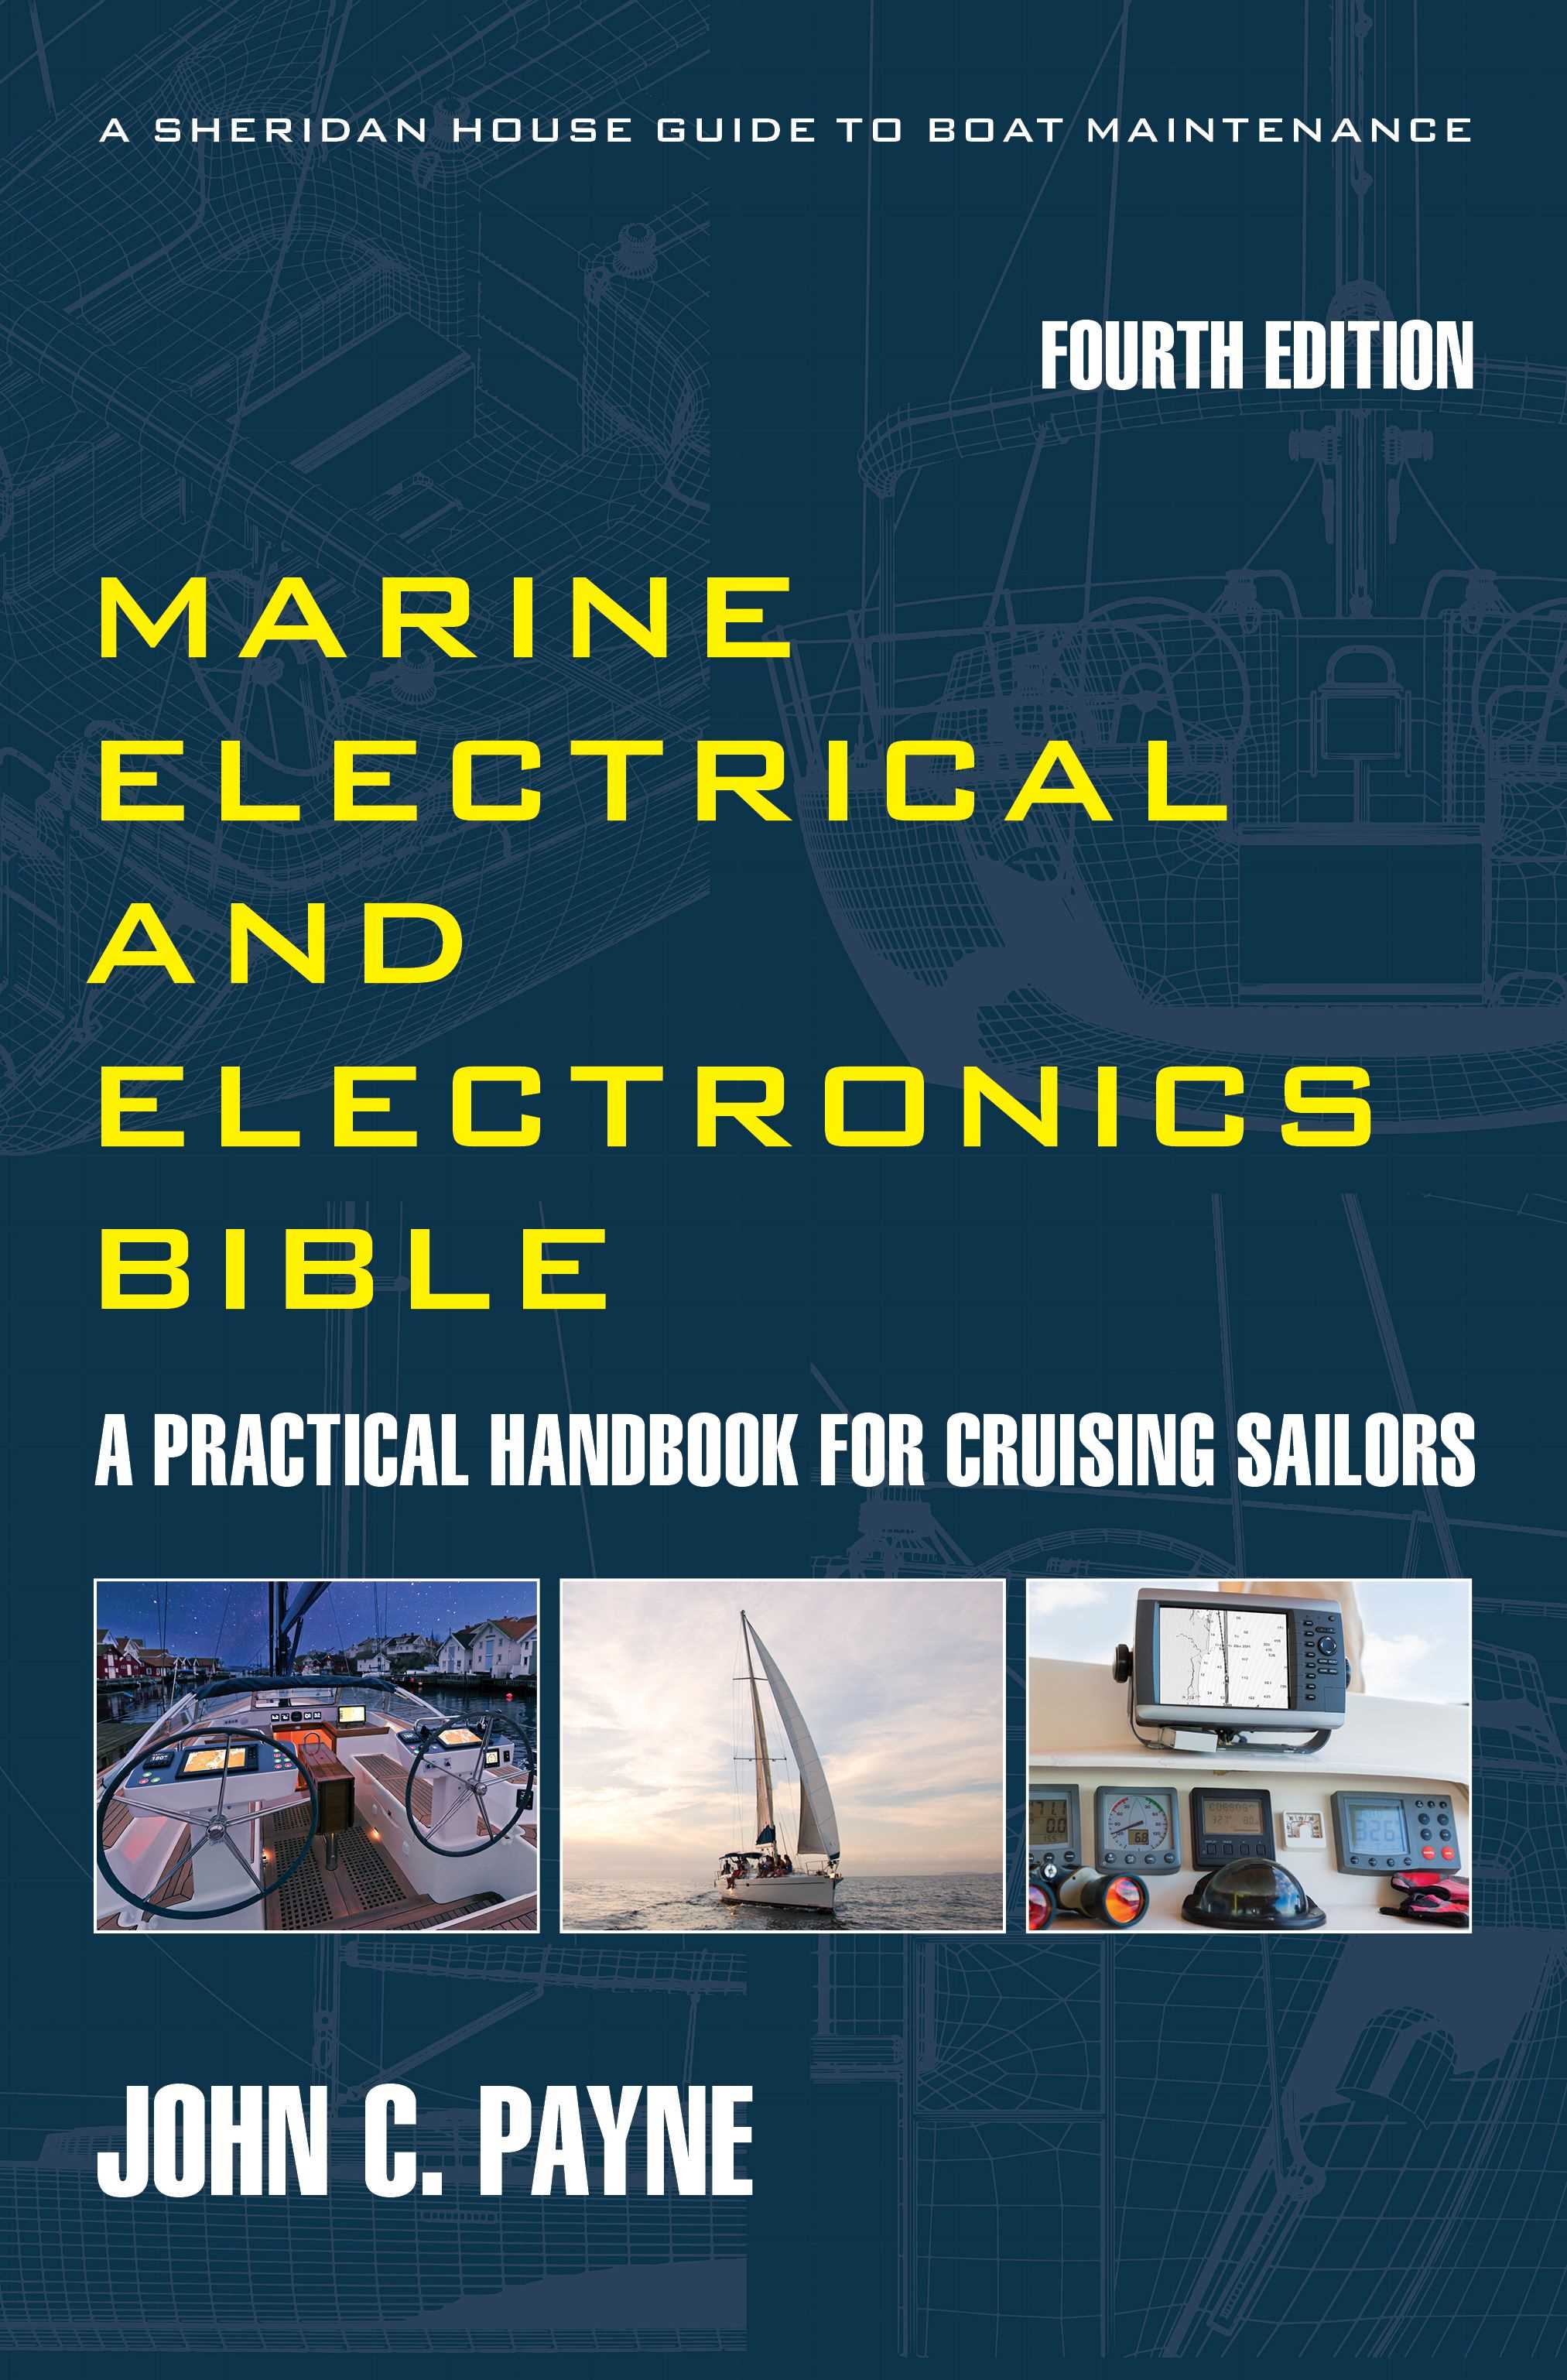 The Marine Electrical and Electronics Bible 4th Edition.